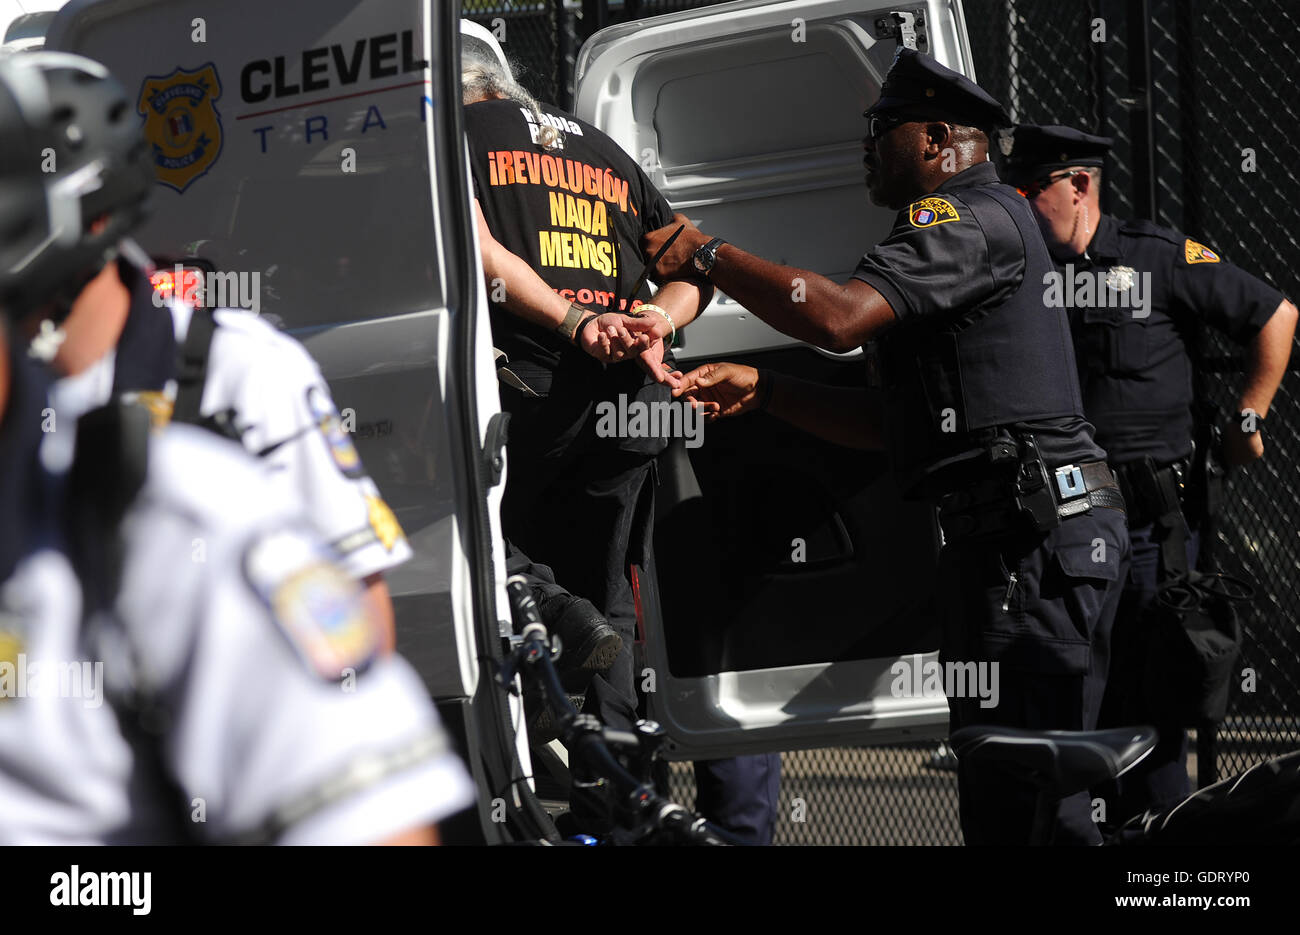 Cleveland, Ohio, USA. 20th July, 2016. A member of the Revolutionary Communist Party is arrested and placed in a police van after the group attempted to burn a flag near the Quicken Loans Arena on day three of the 2016 Republican National Convention. Credit:  Paul Hennessy/Alamy Live News Stock Photo